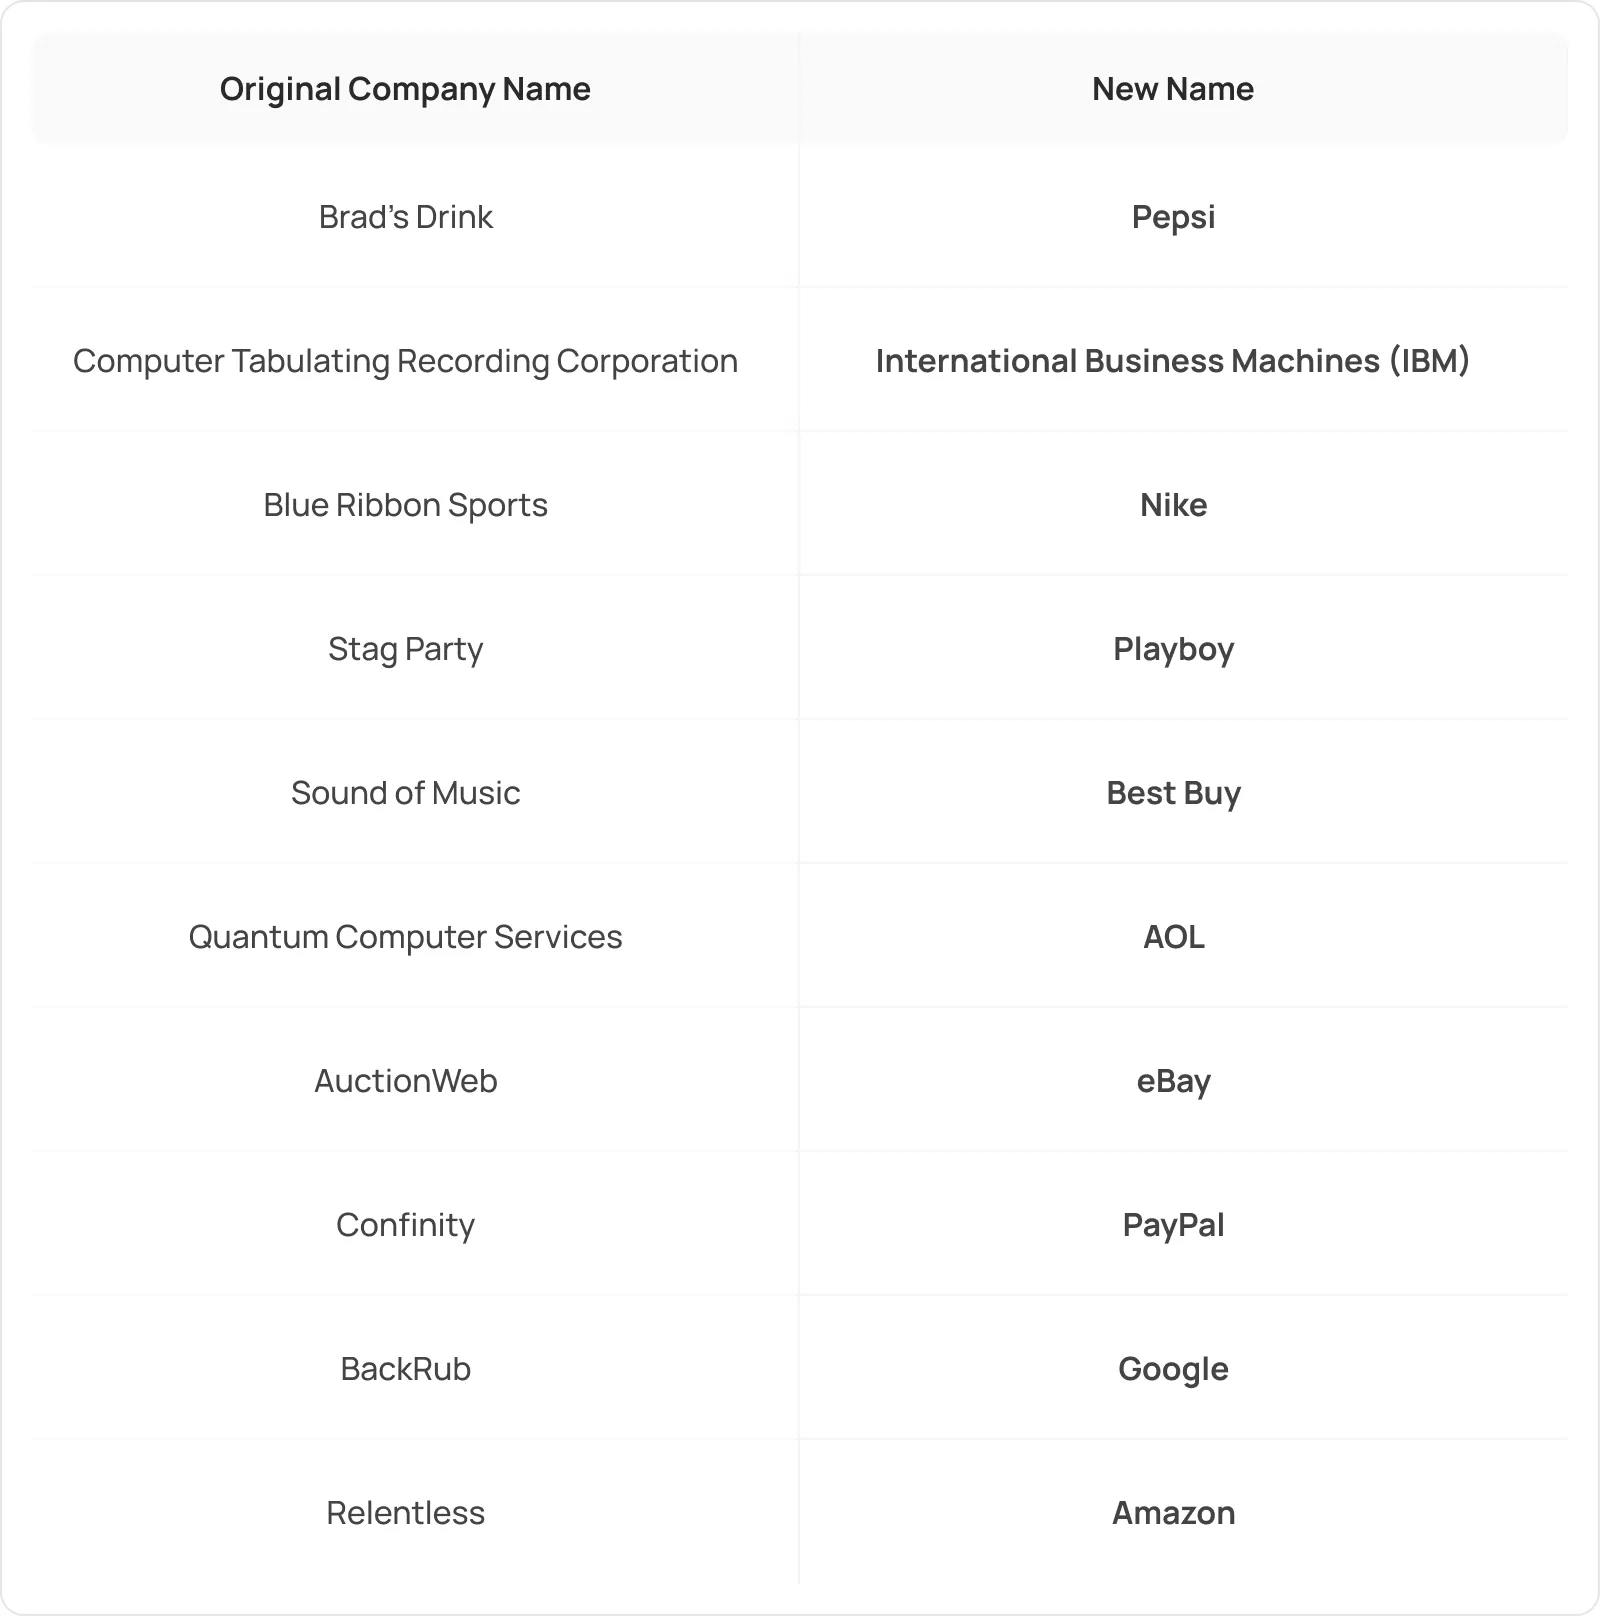 Companies old and new names